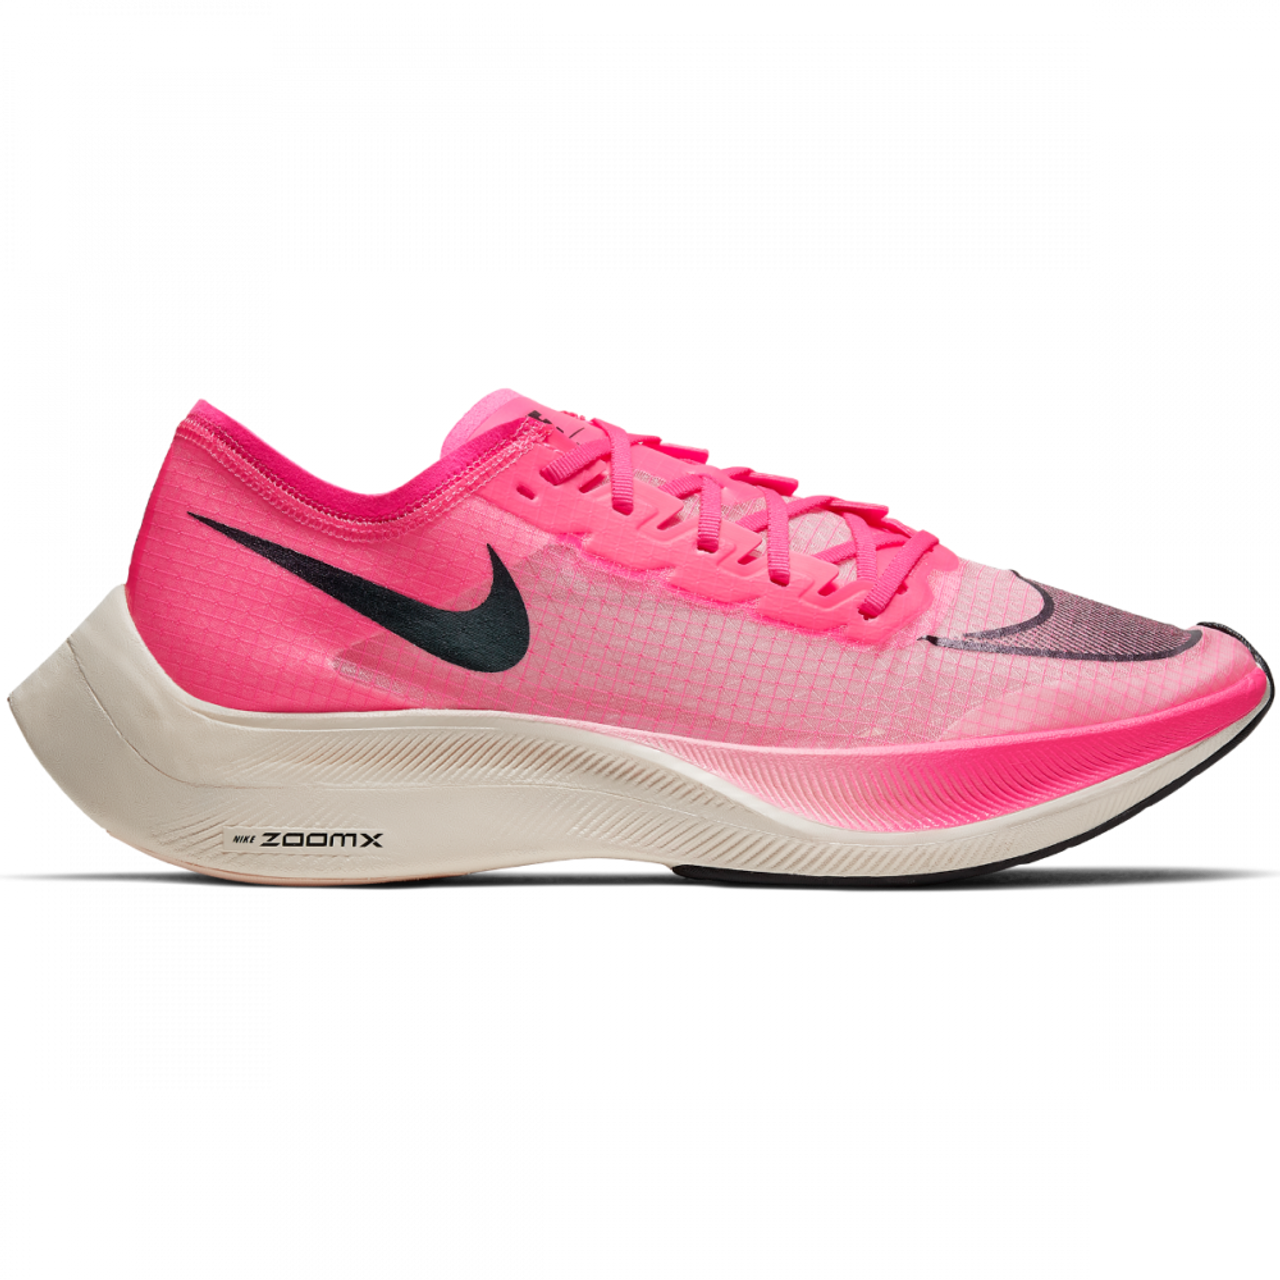 nike zoomx vaporfly next where to buy